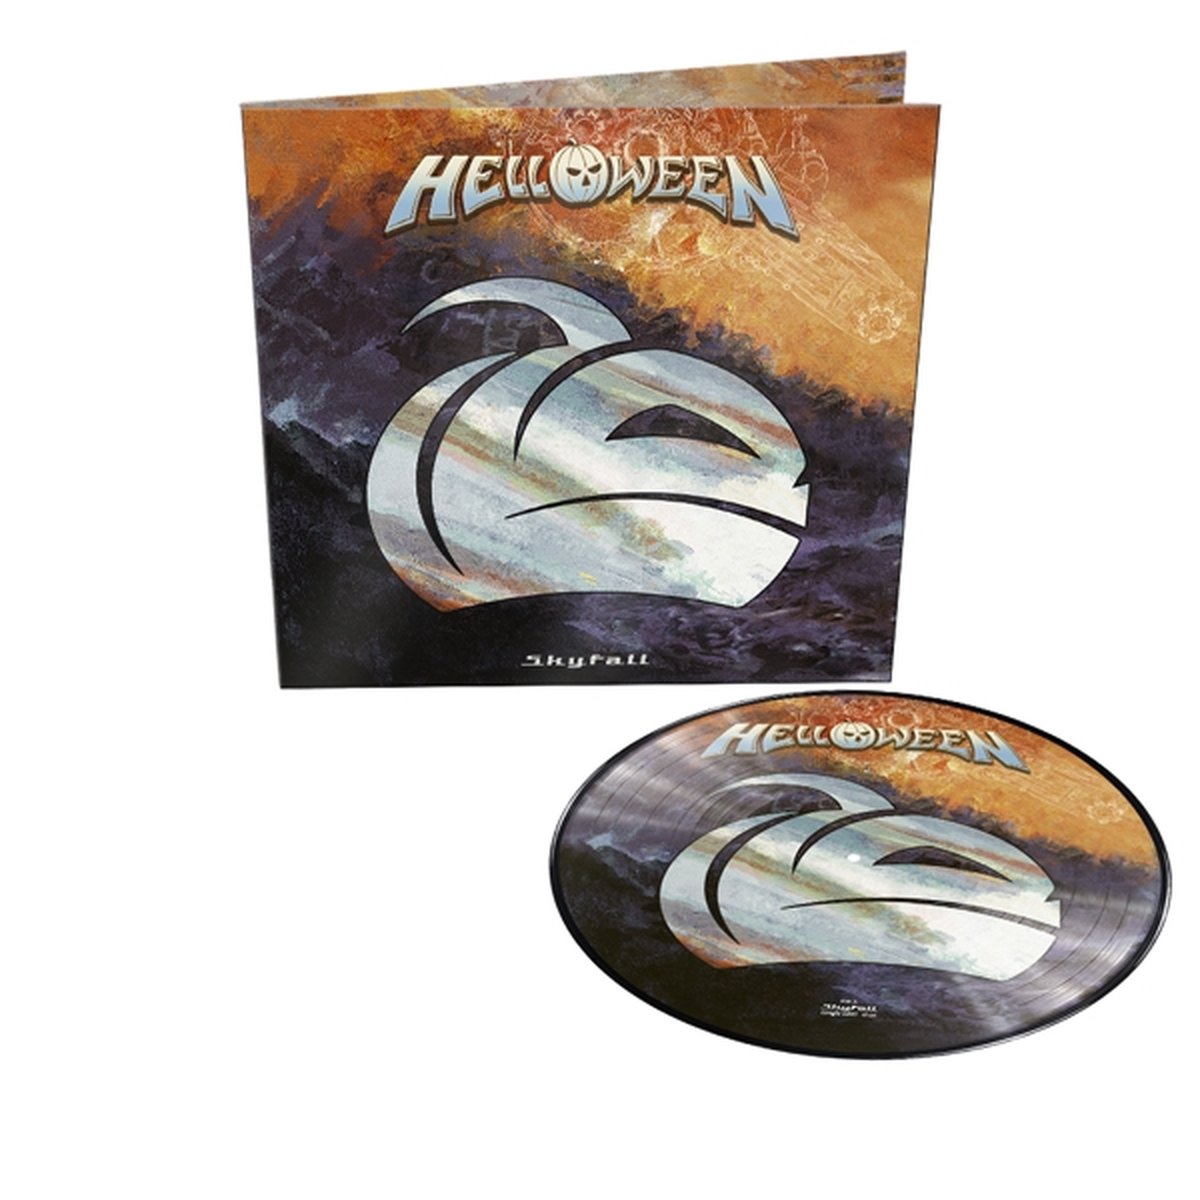 Skyfall (Picture Disc) - Helloween